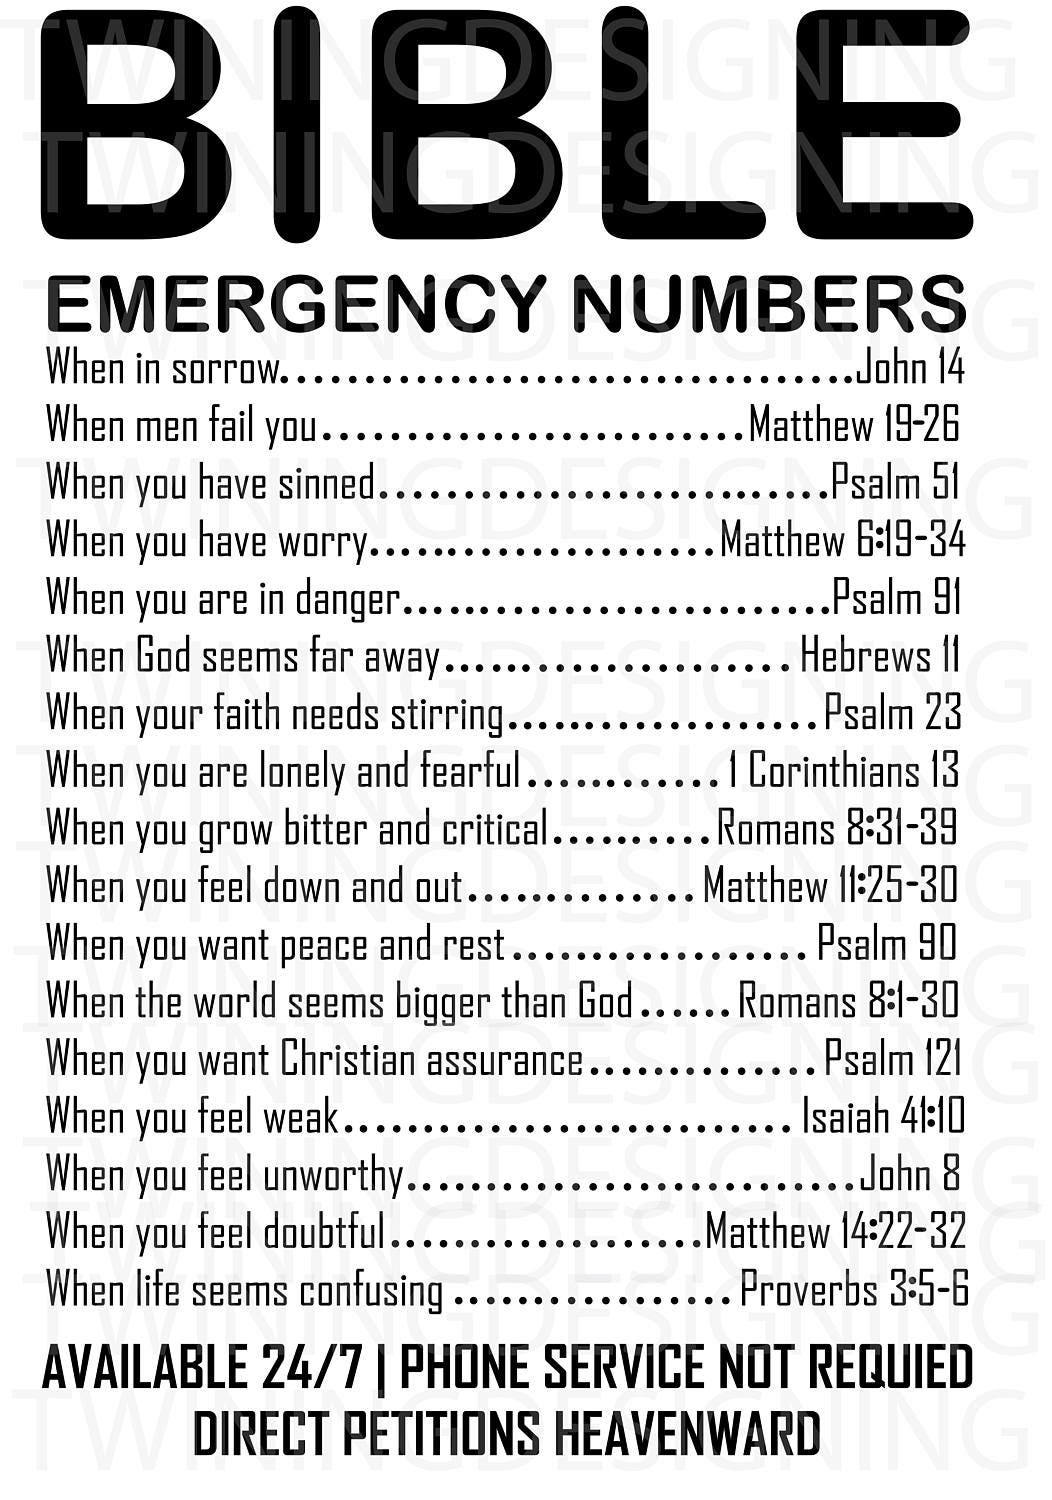 Bible Emergency Numbers Poster